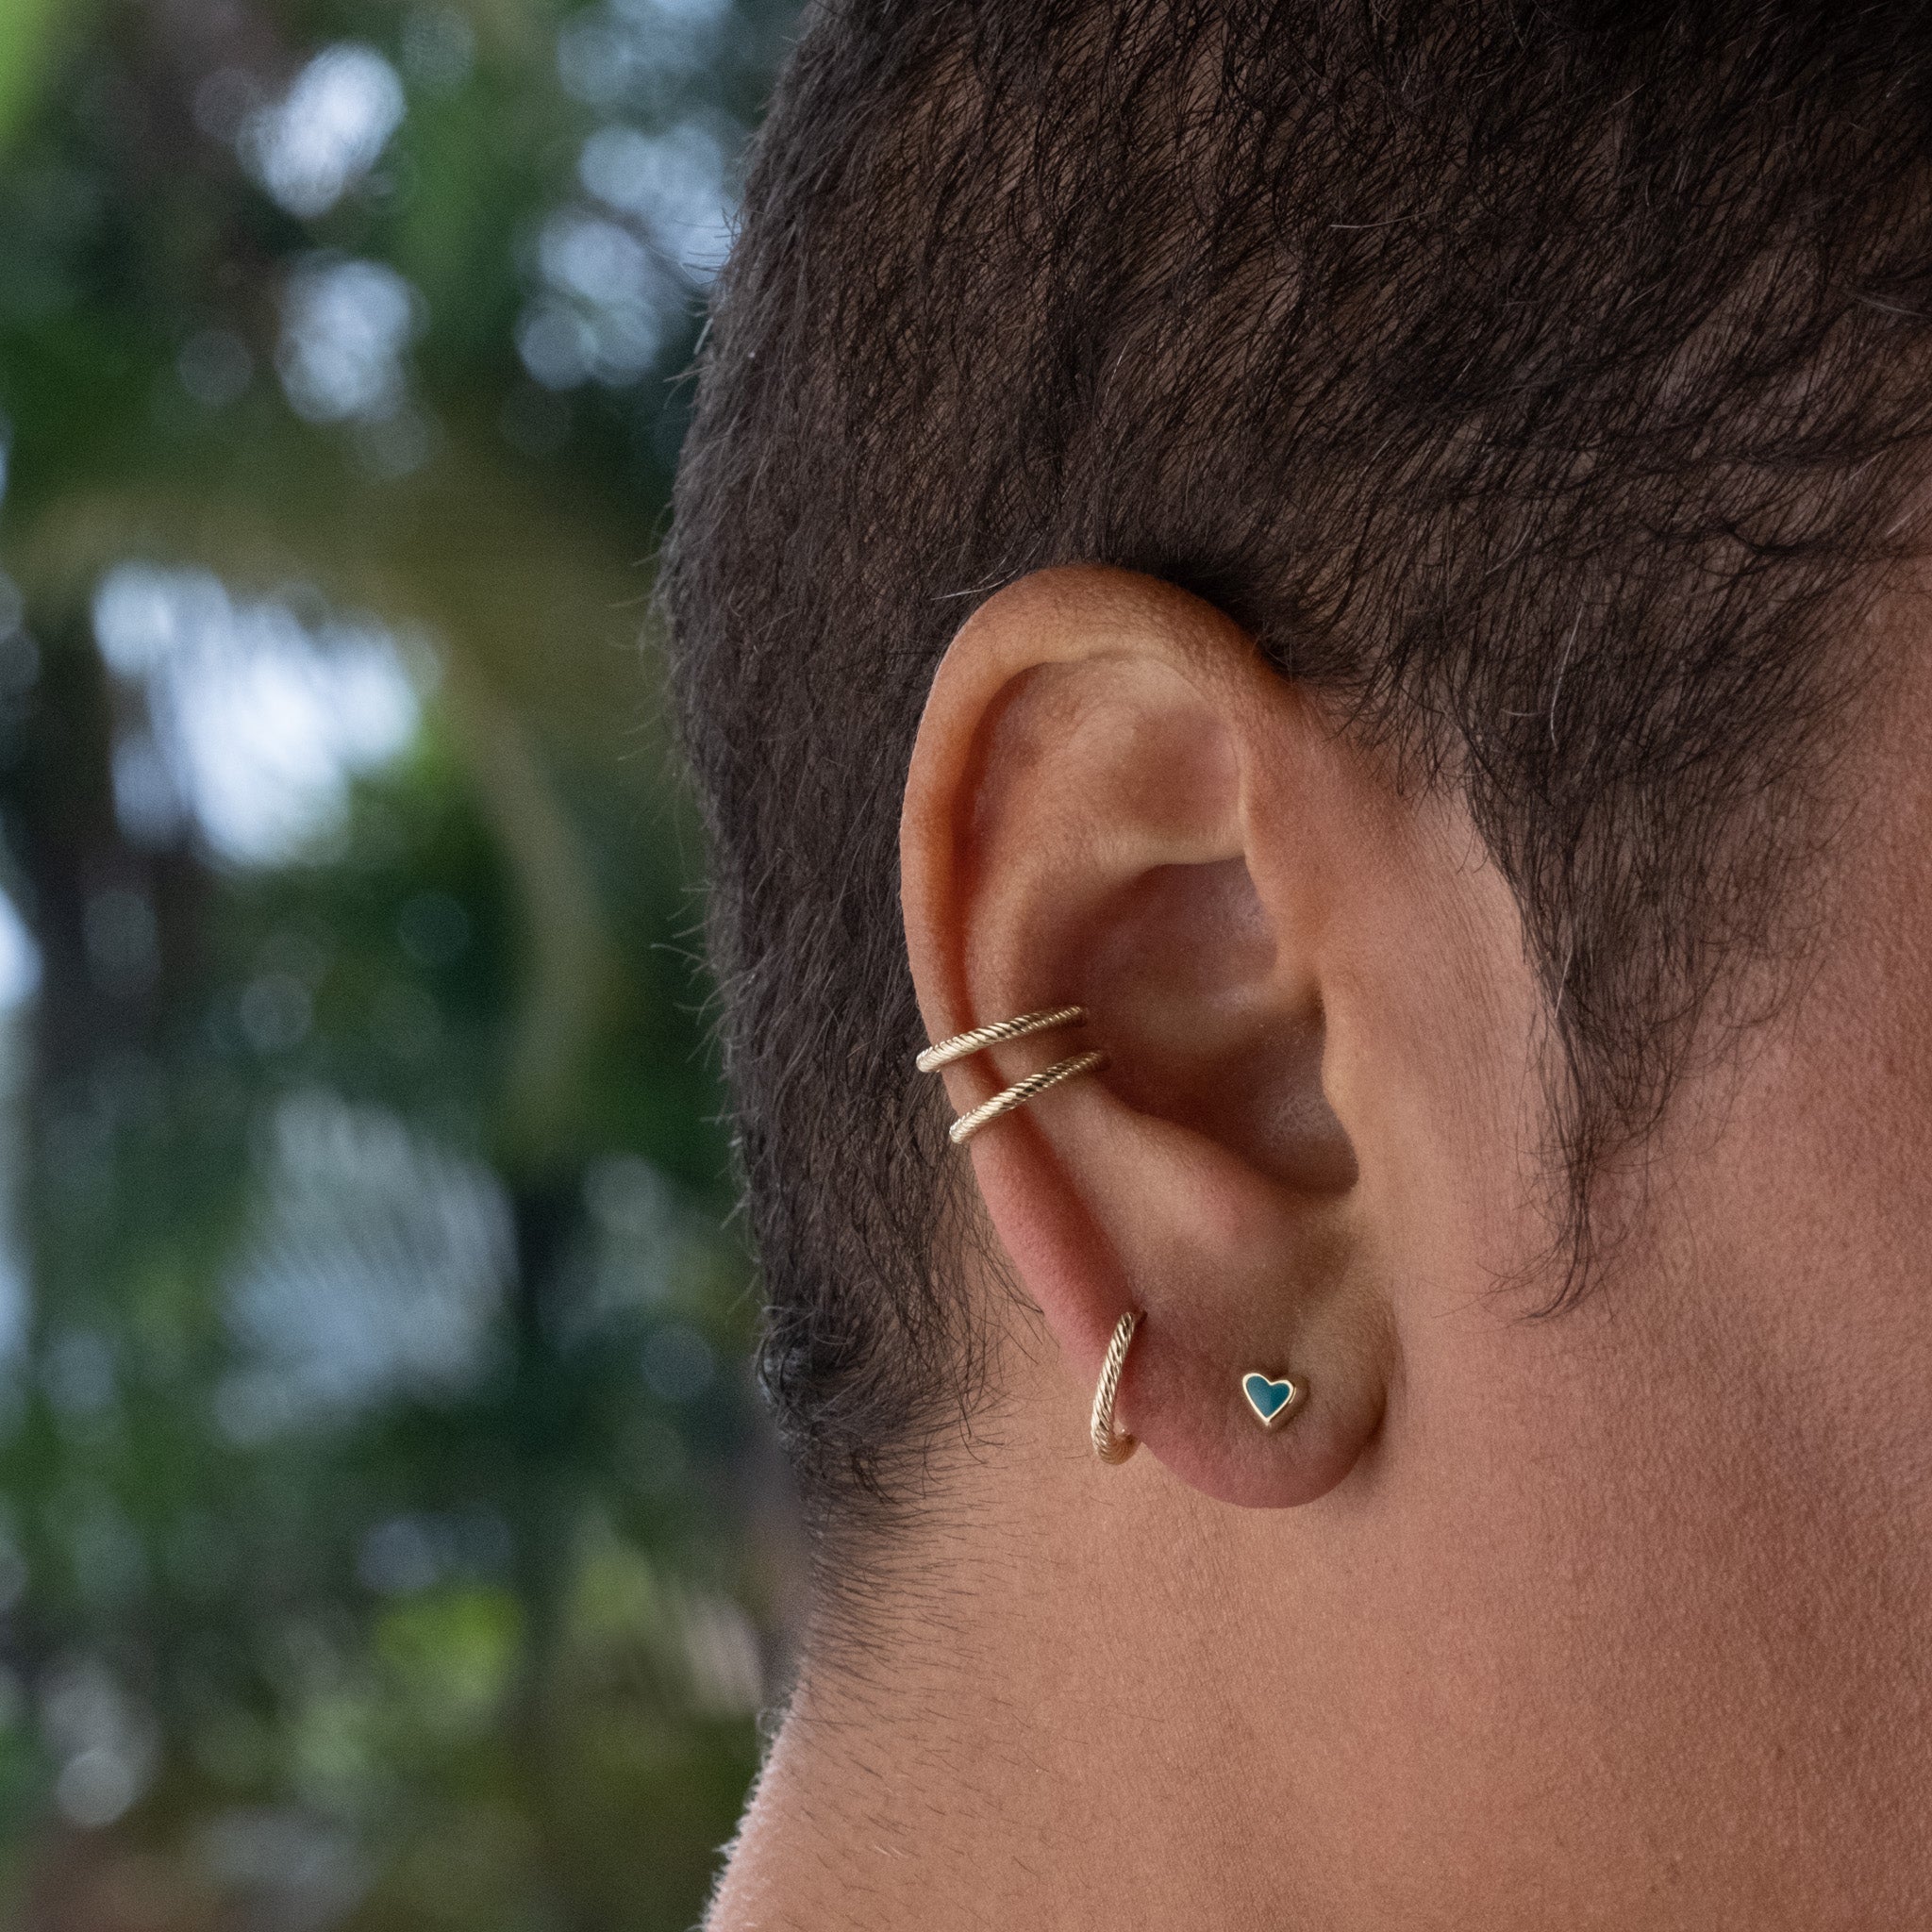 a close up of a person with Aiden Jae Mini Heart Studs in their ear piercing.